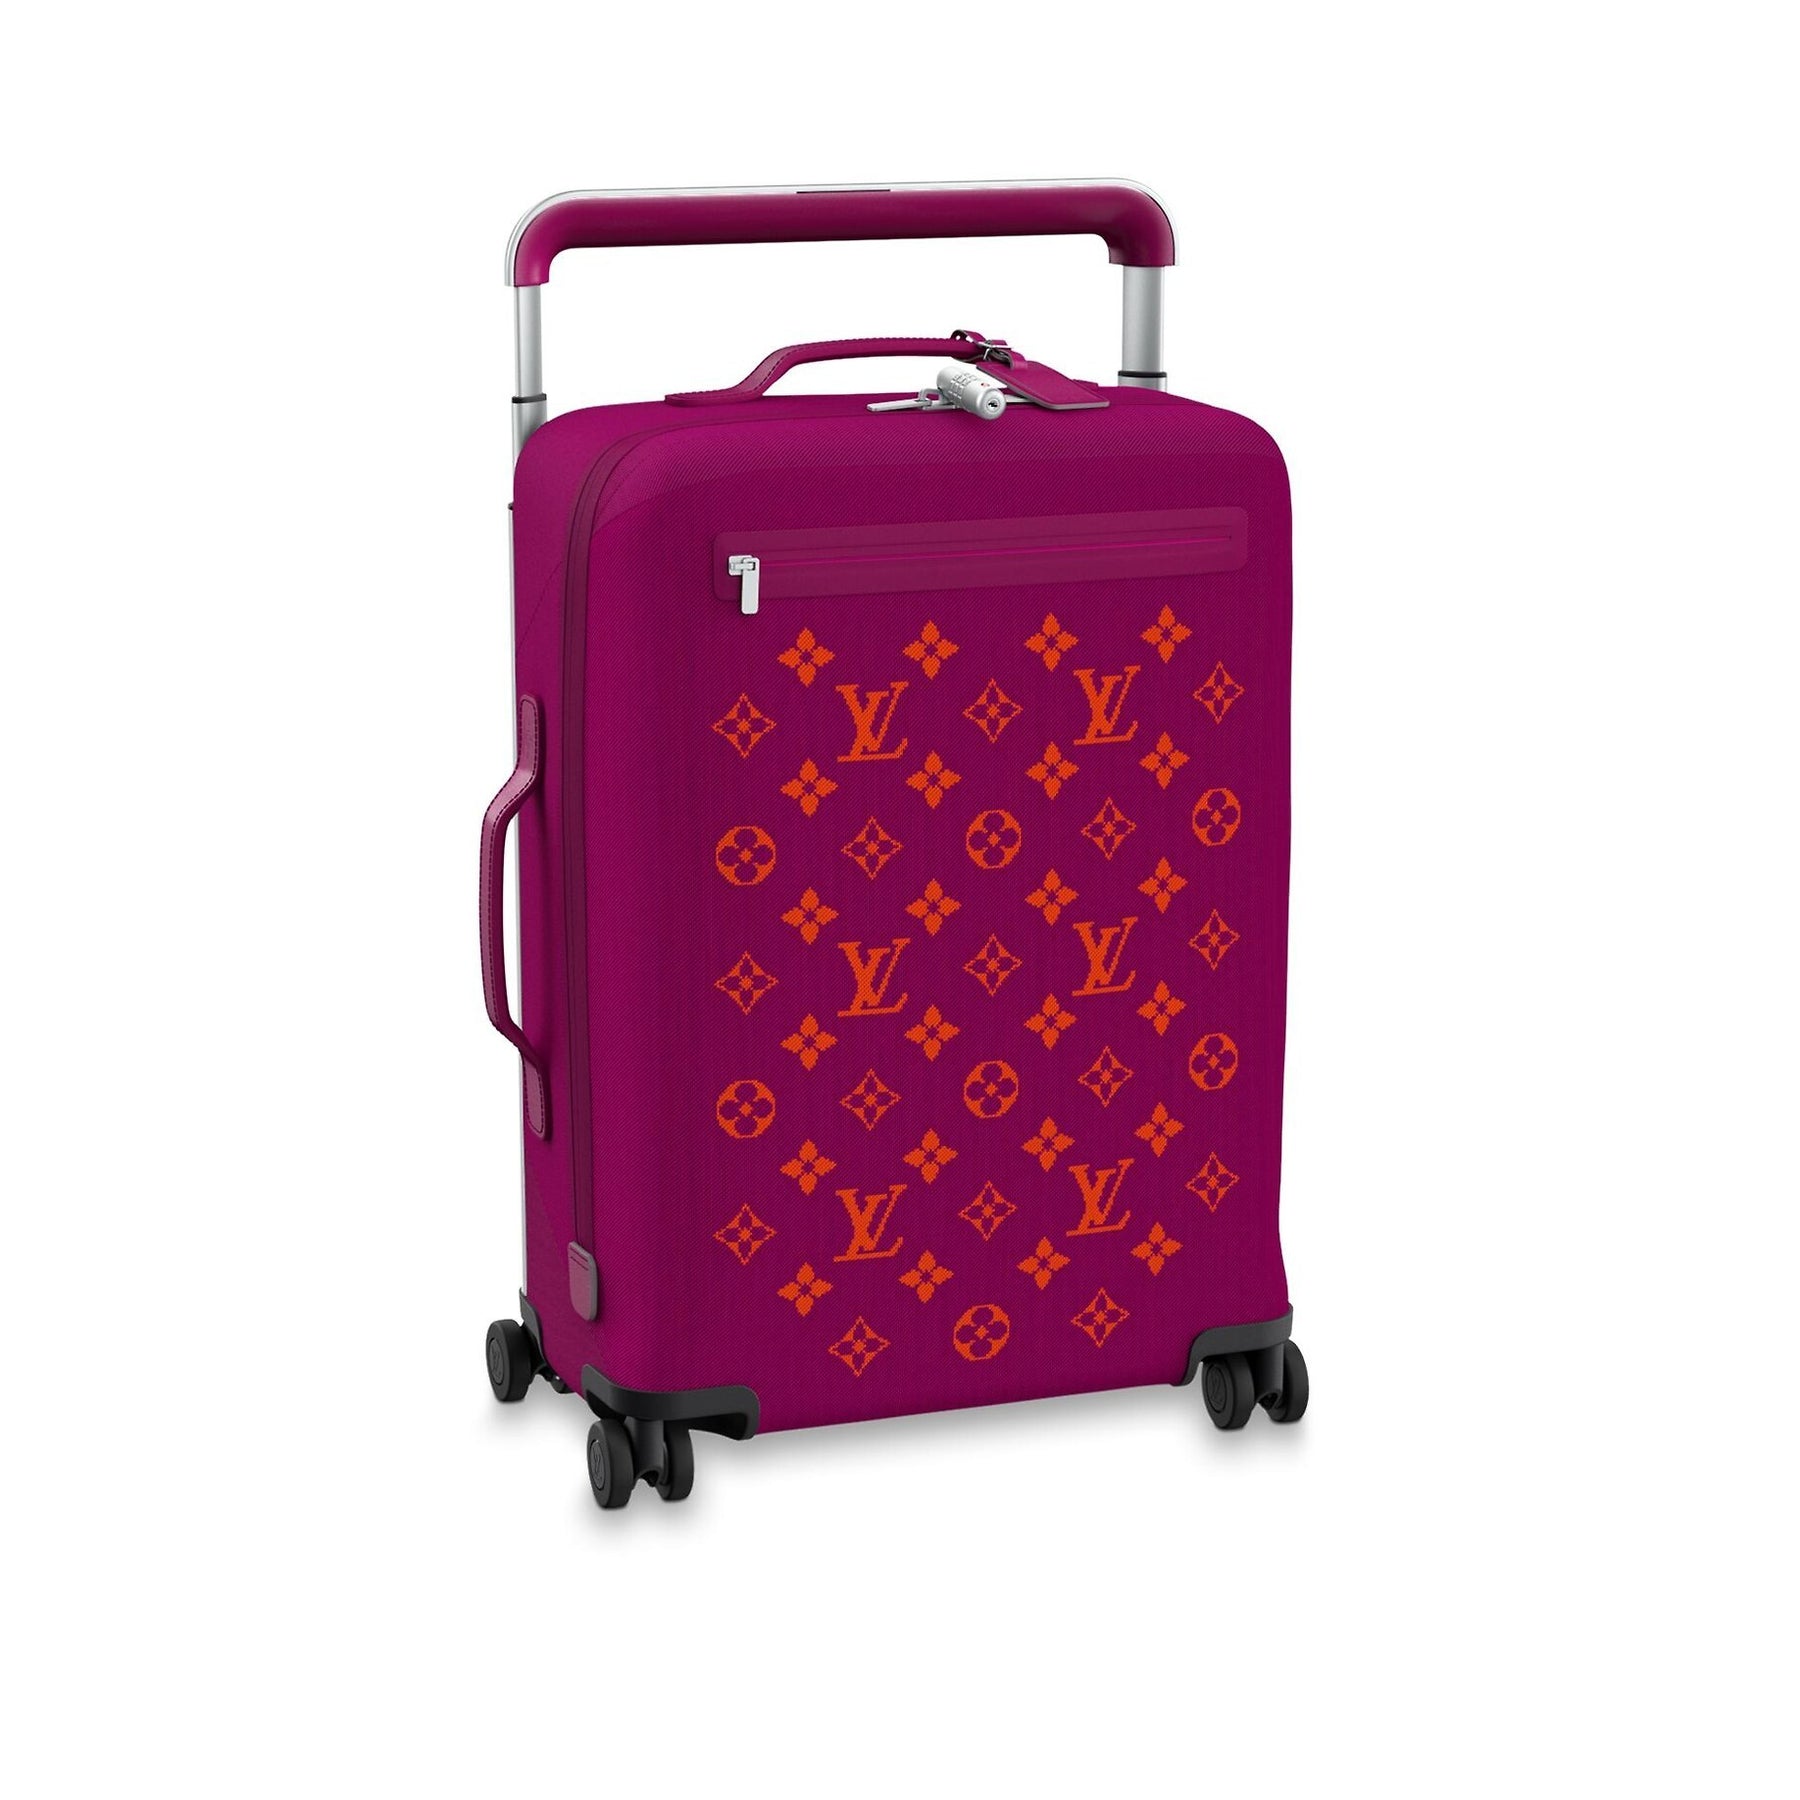 Louis Vuitton's Rolling Luggage Comes In Soft Version